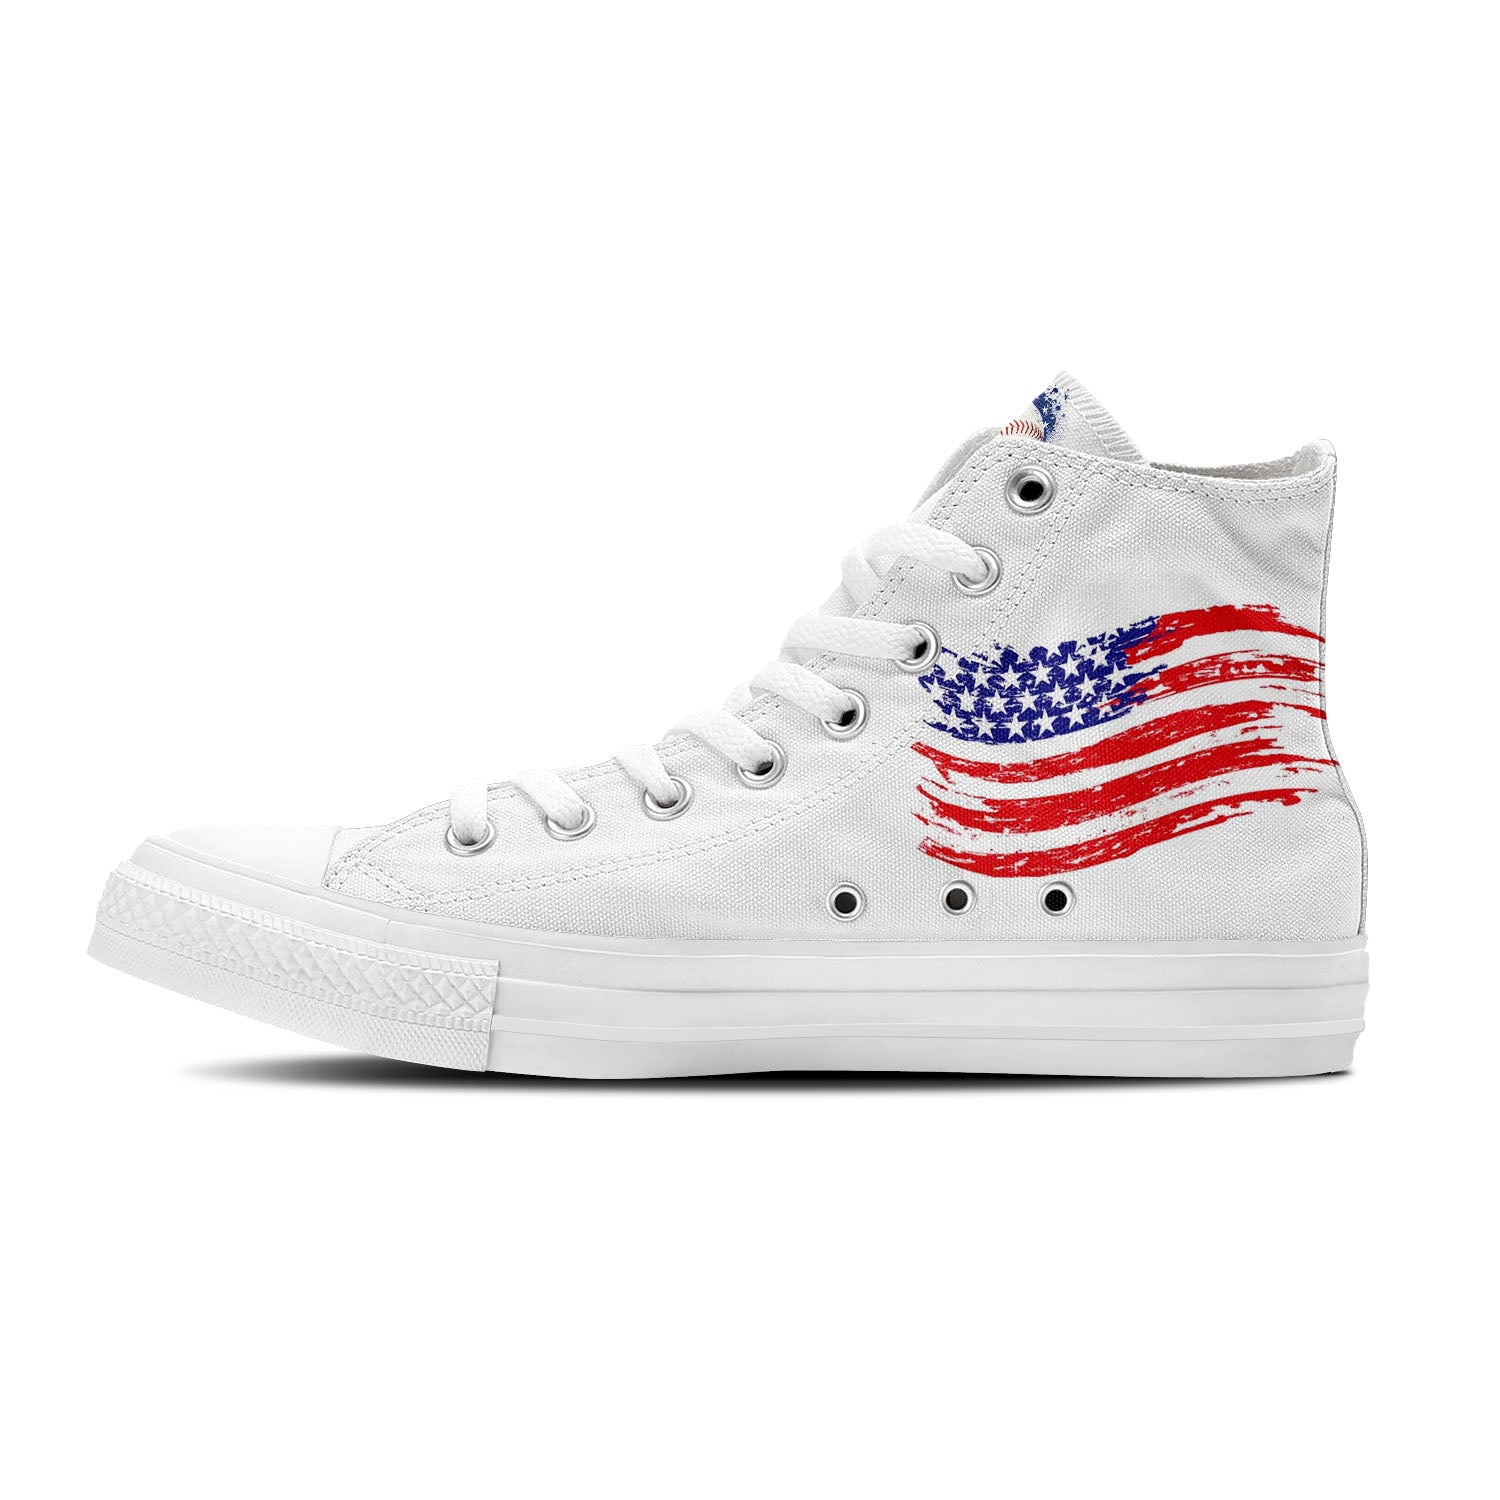 custom high top canvas shoes white-red-blue